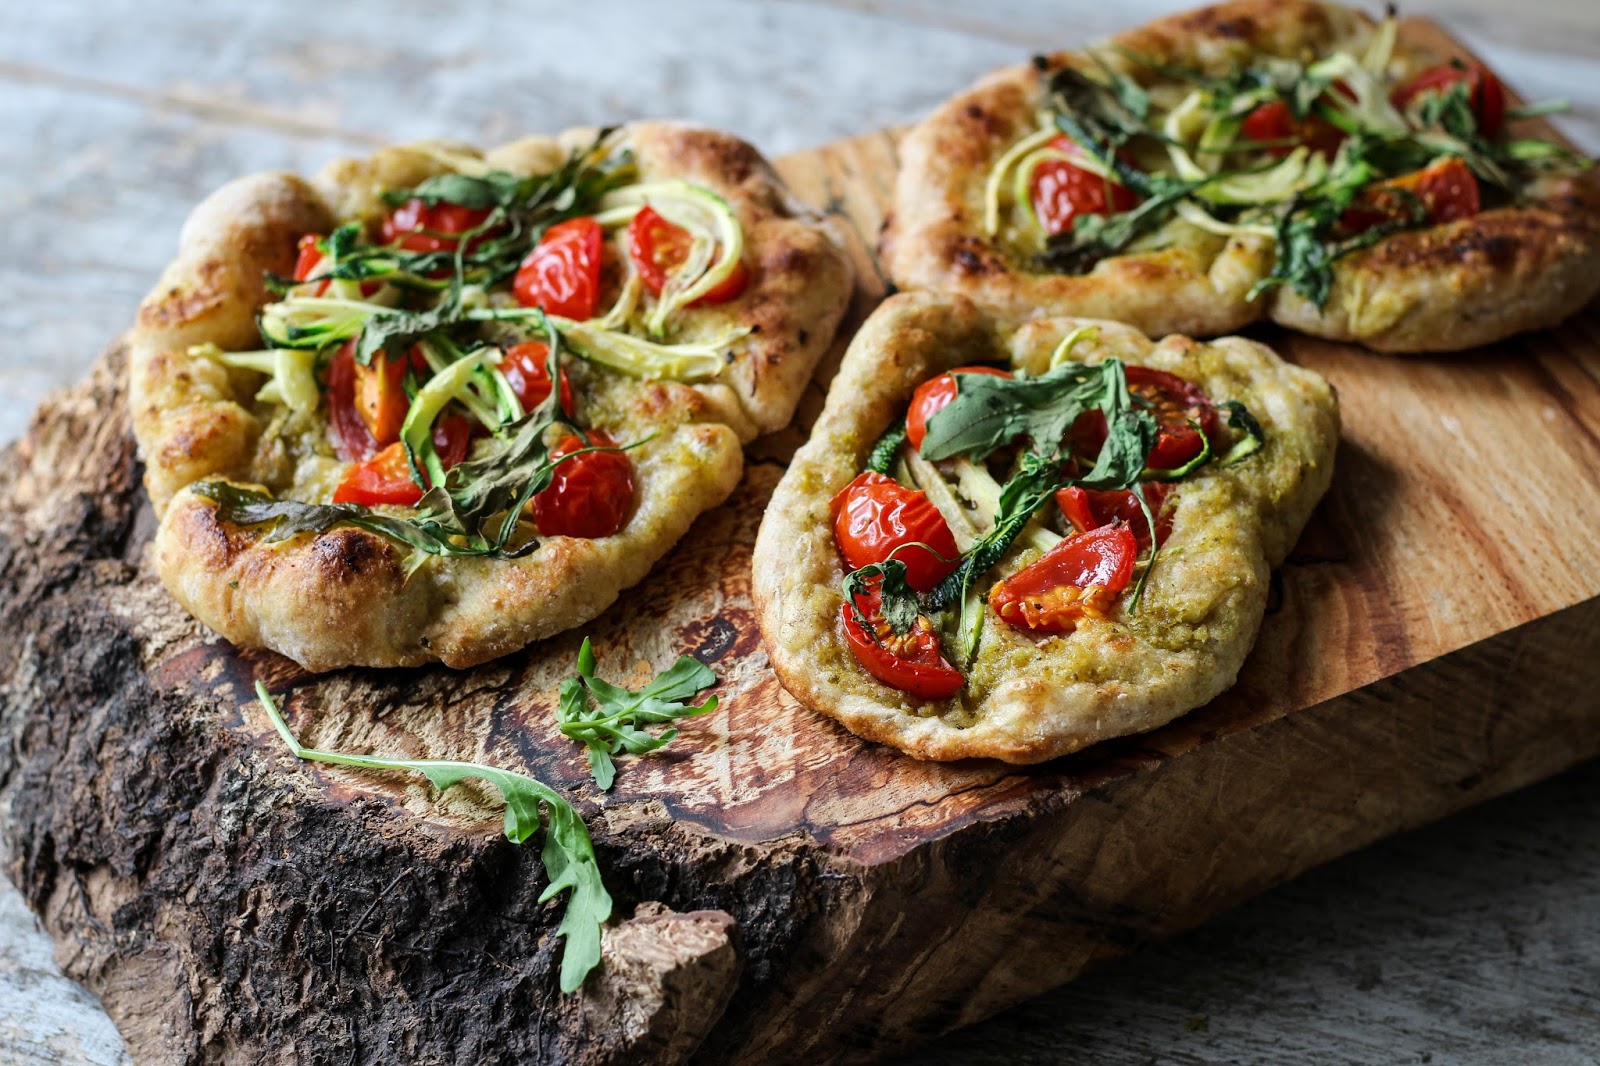 The Spoon and Whisk: Garlic Pesto, Tomato and Courgette Pizzettes